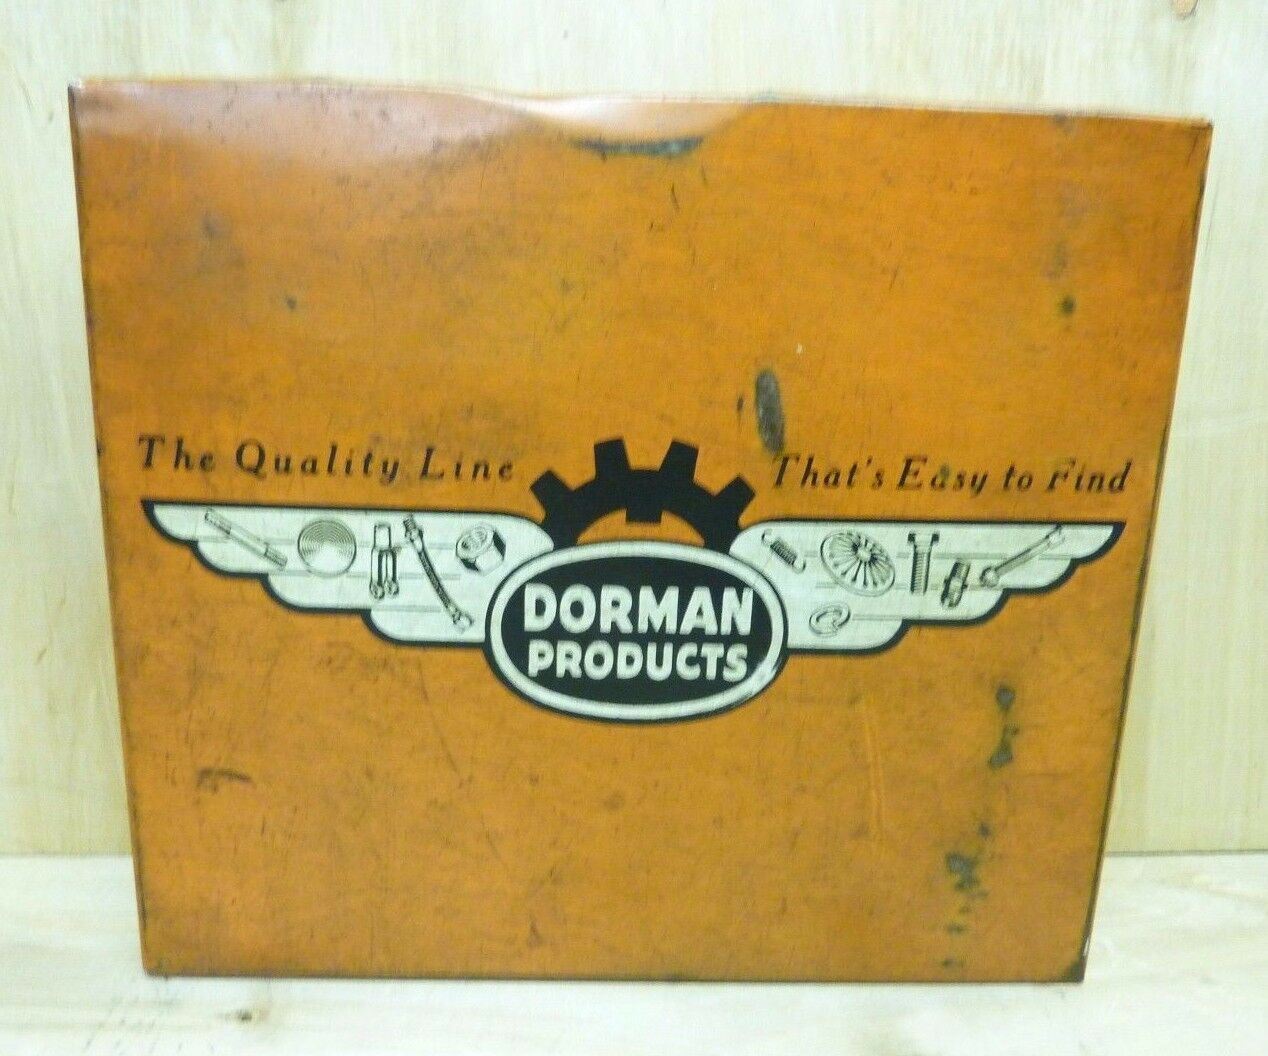 DORMAN Products Old Expansion Plug Display Cabinet Auto Truck Parts Advertising